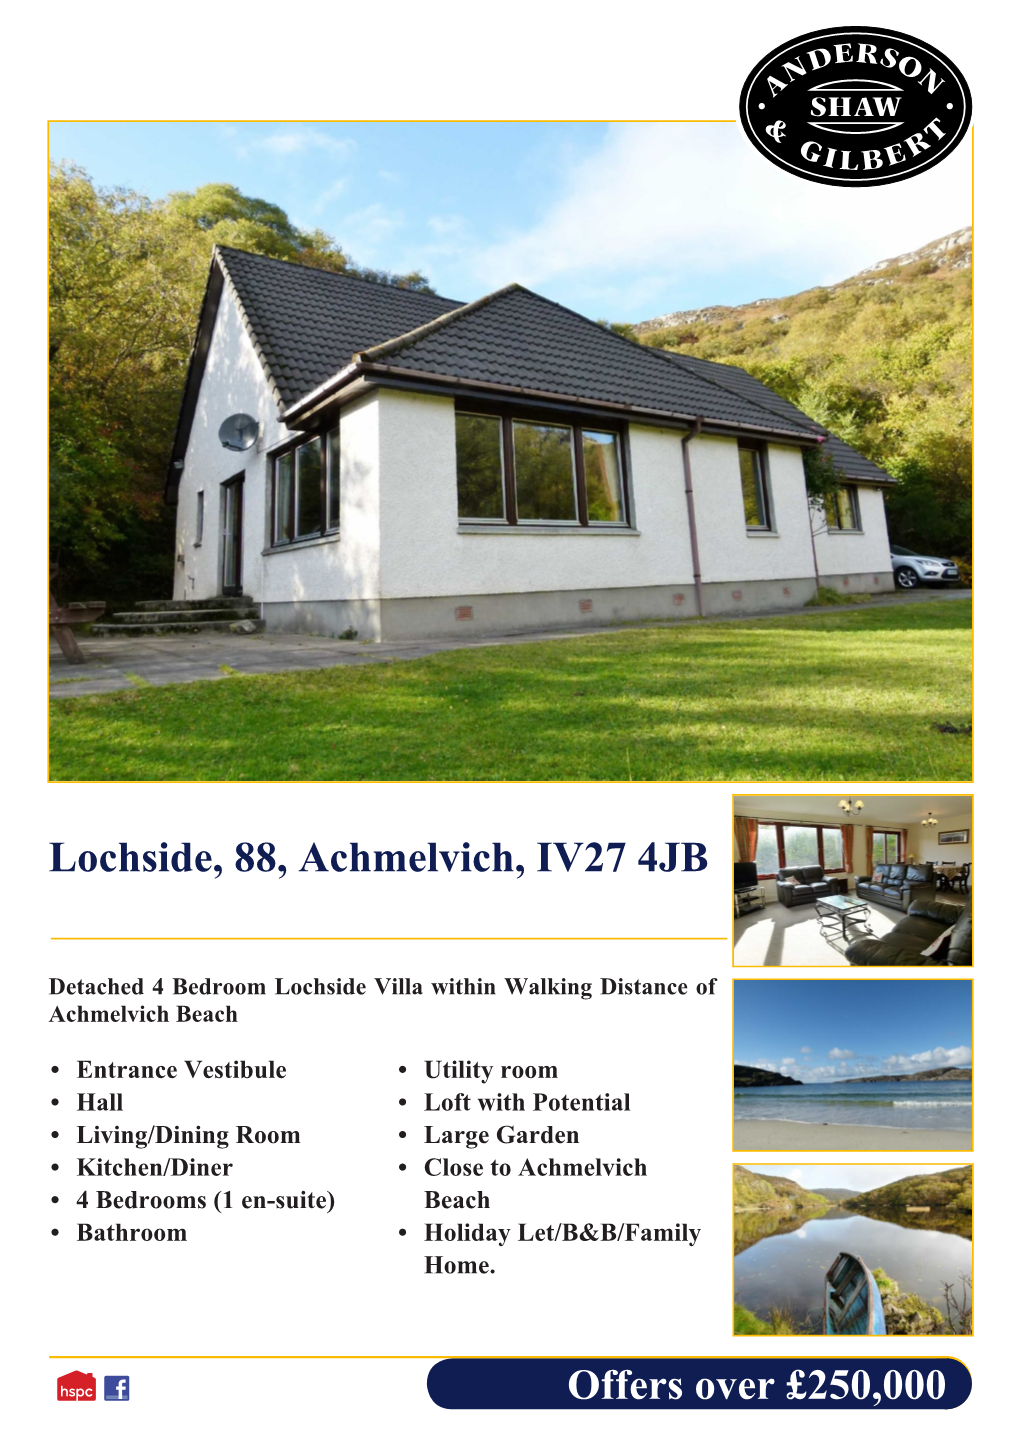 Offers Over £250,000 Lochside, 88, Achmelvich, IV27